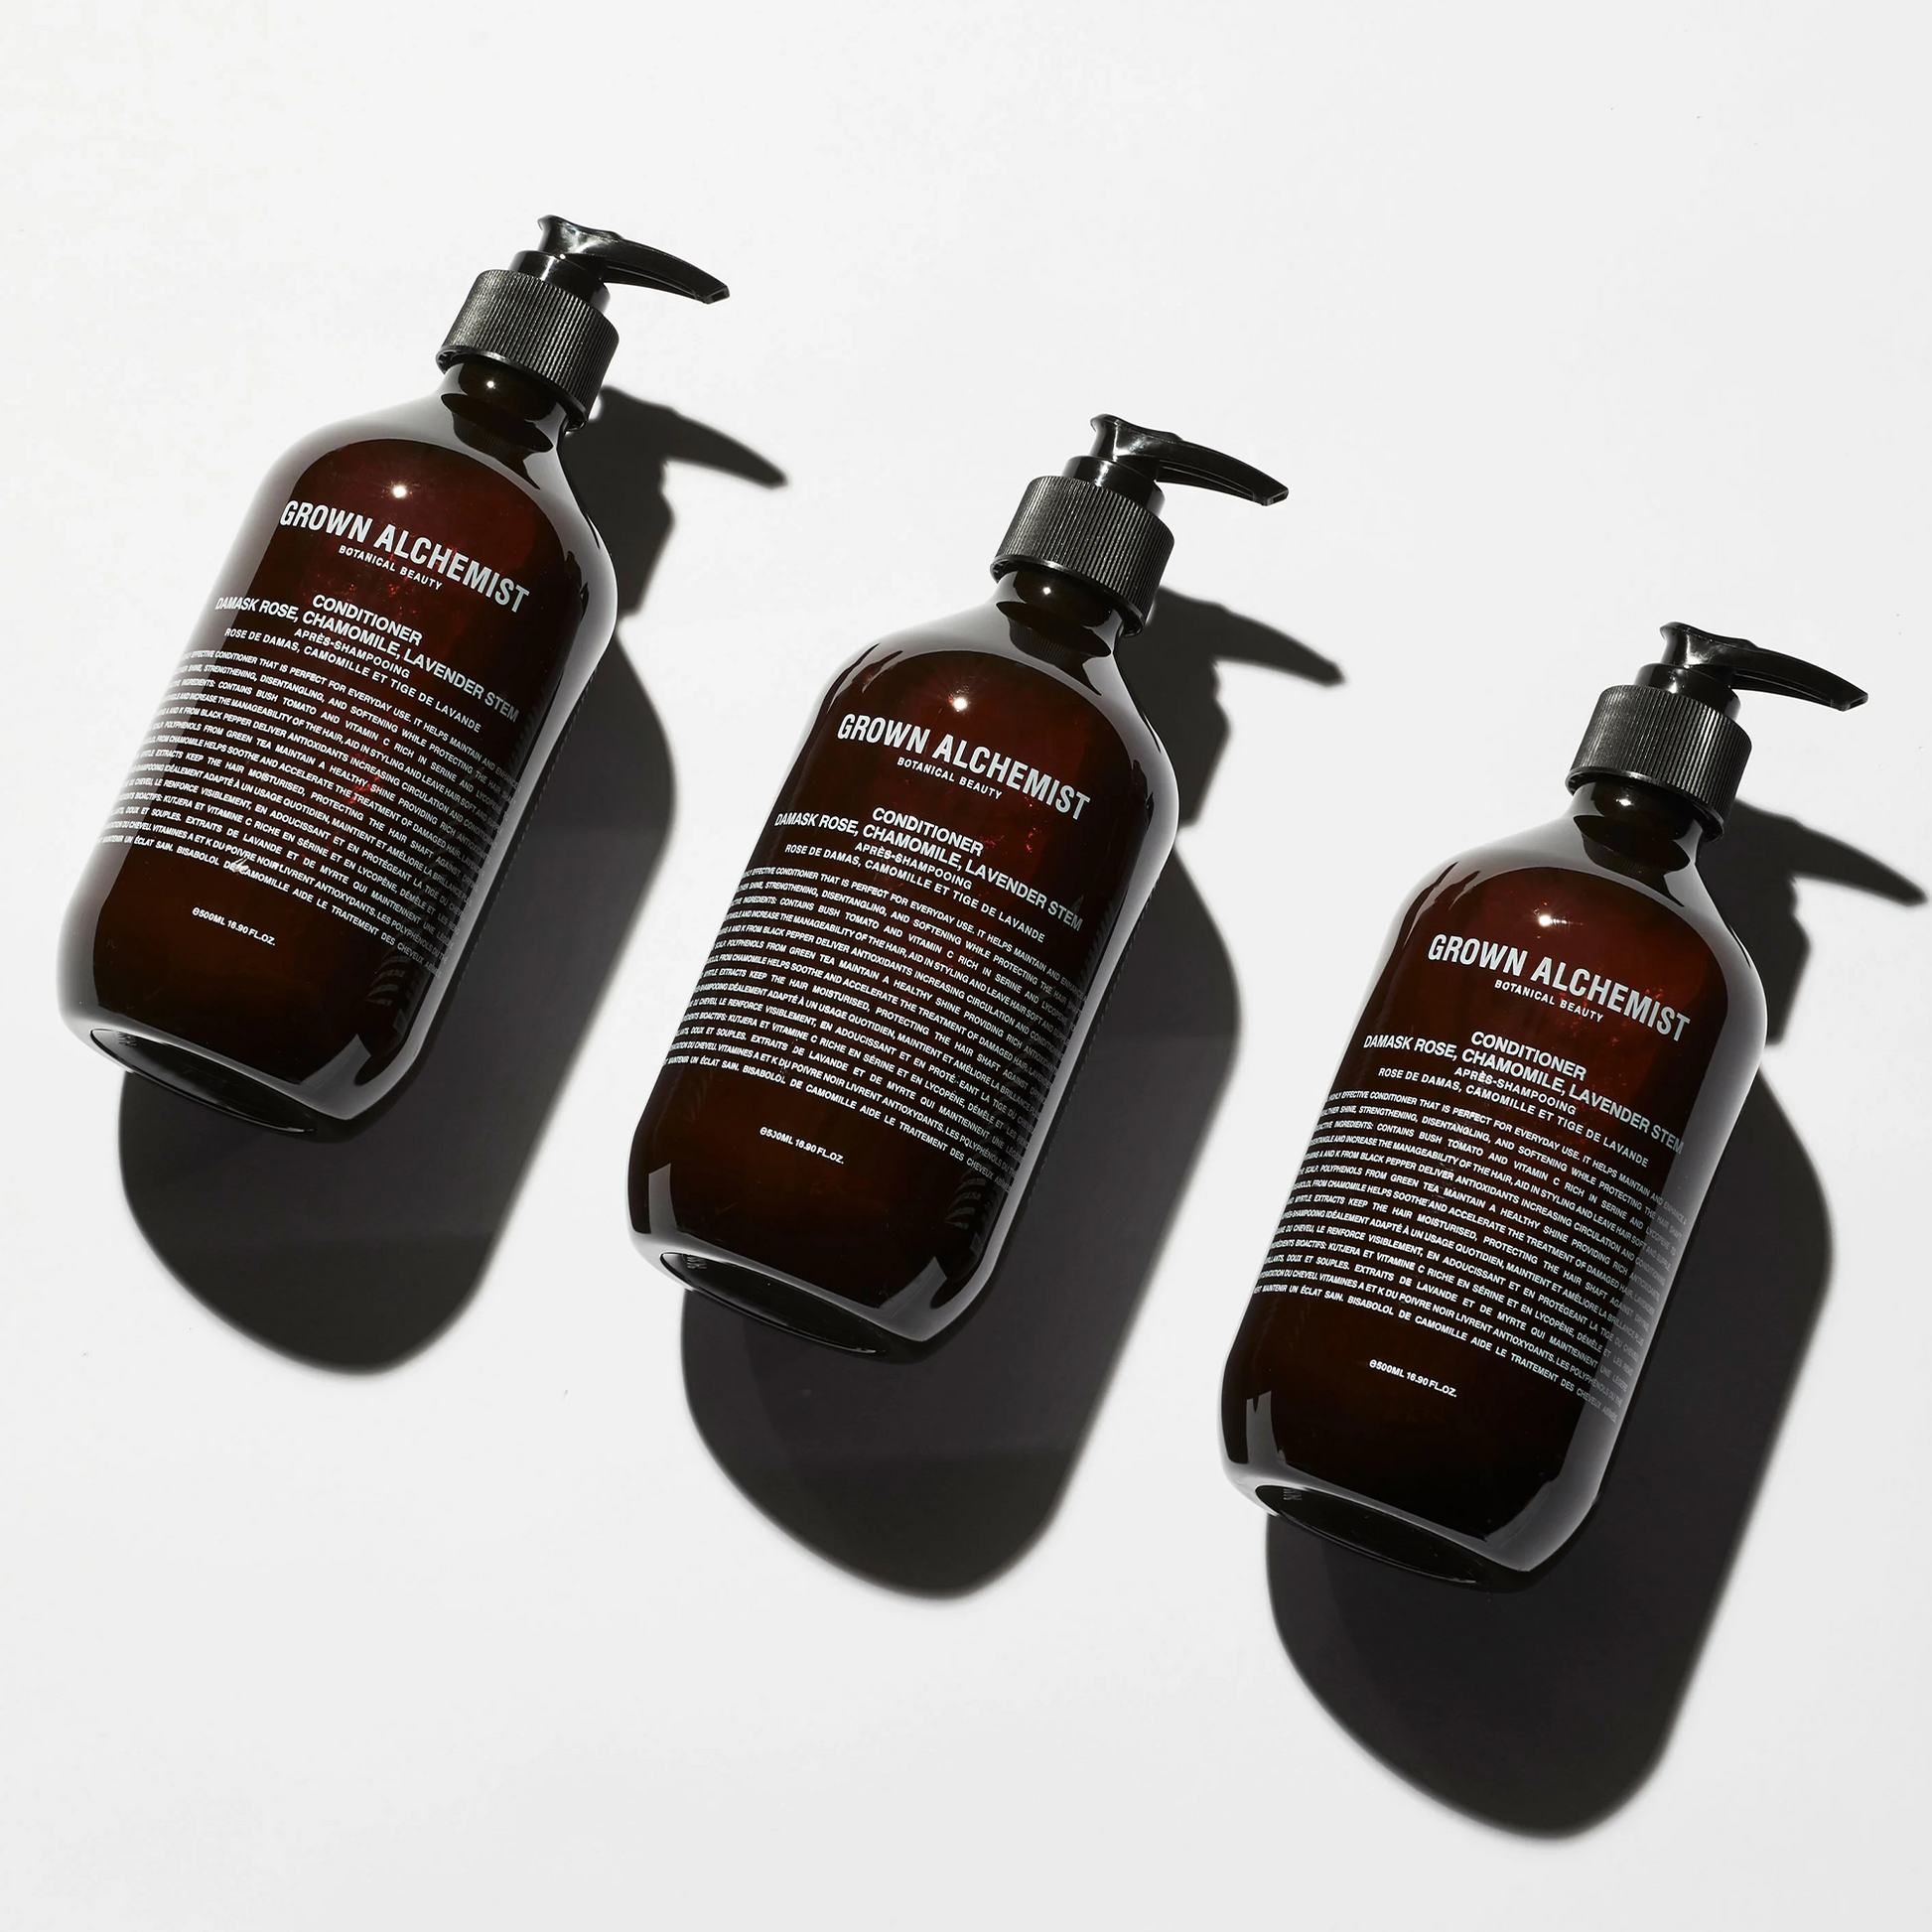 Grown Alchemist Conditioner: A highly effective conditioner that is perfect for everyday use. It helps maintain and enhance a healthier shine, strengthening, disentangling, and softening while protecting the hair shaft.